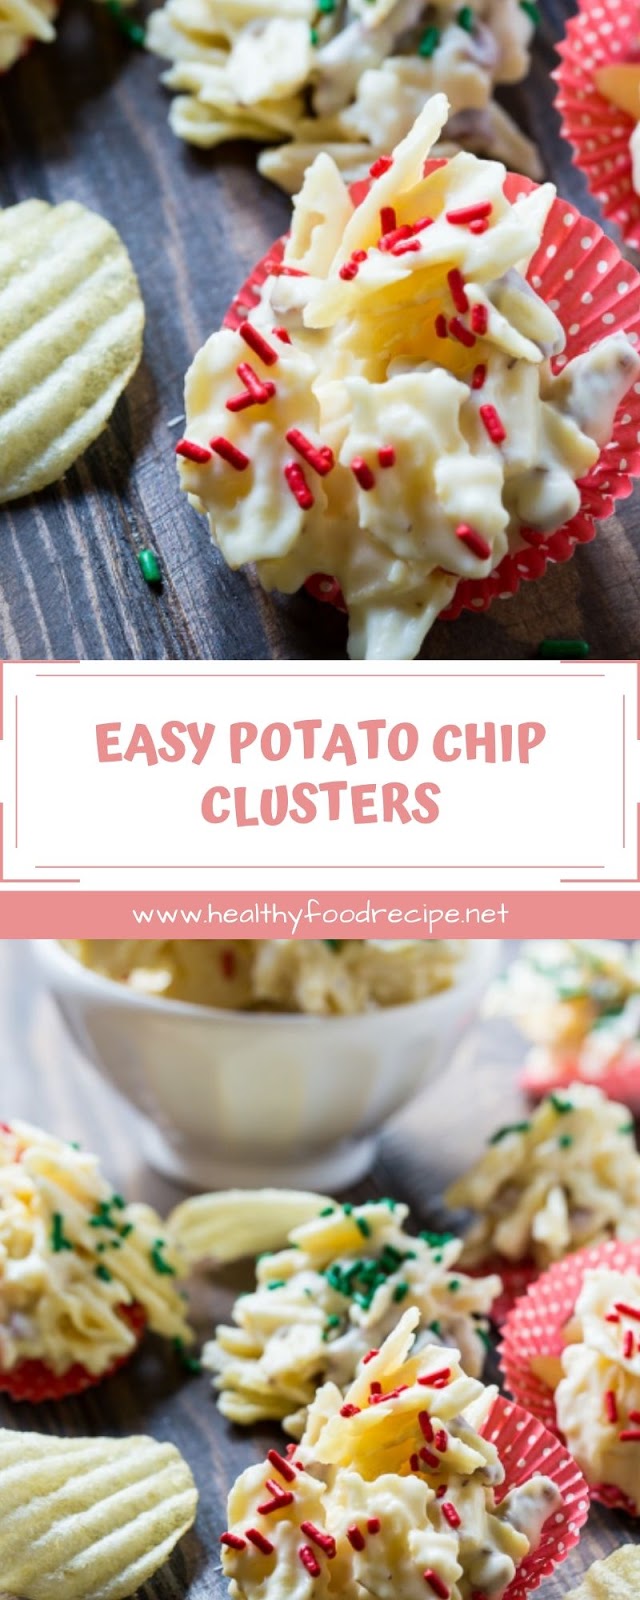 EASY POTATO CHIP CLUSTERS